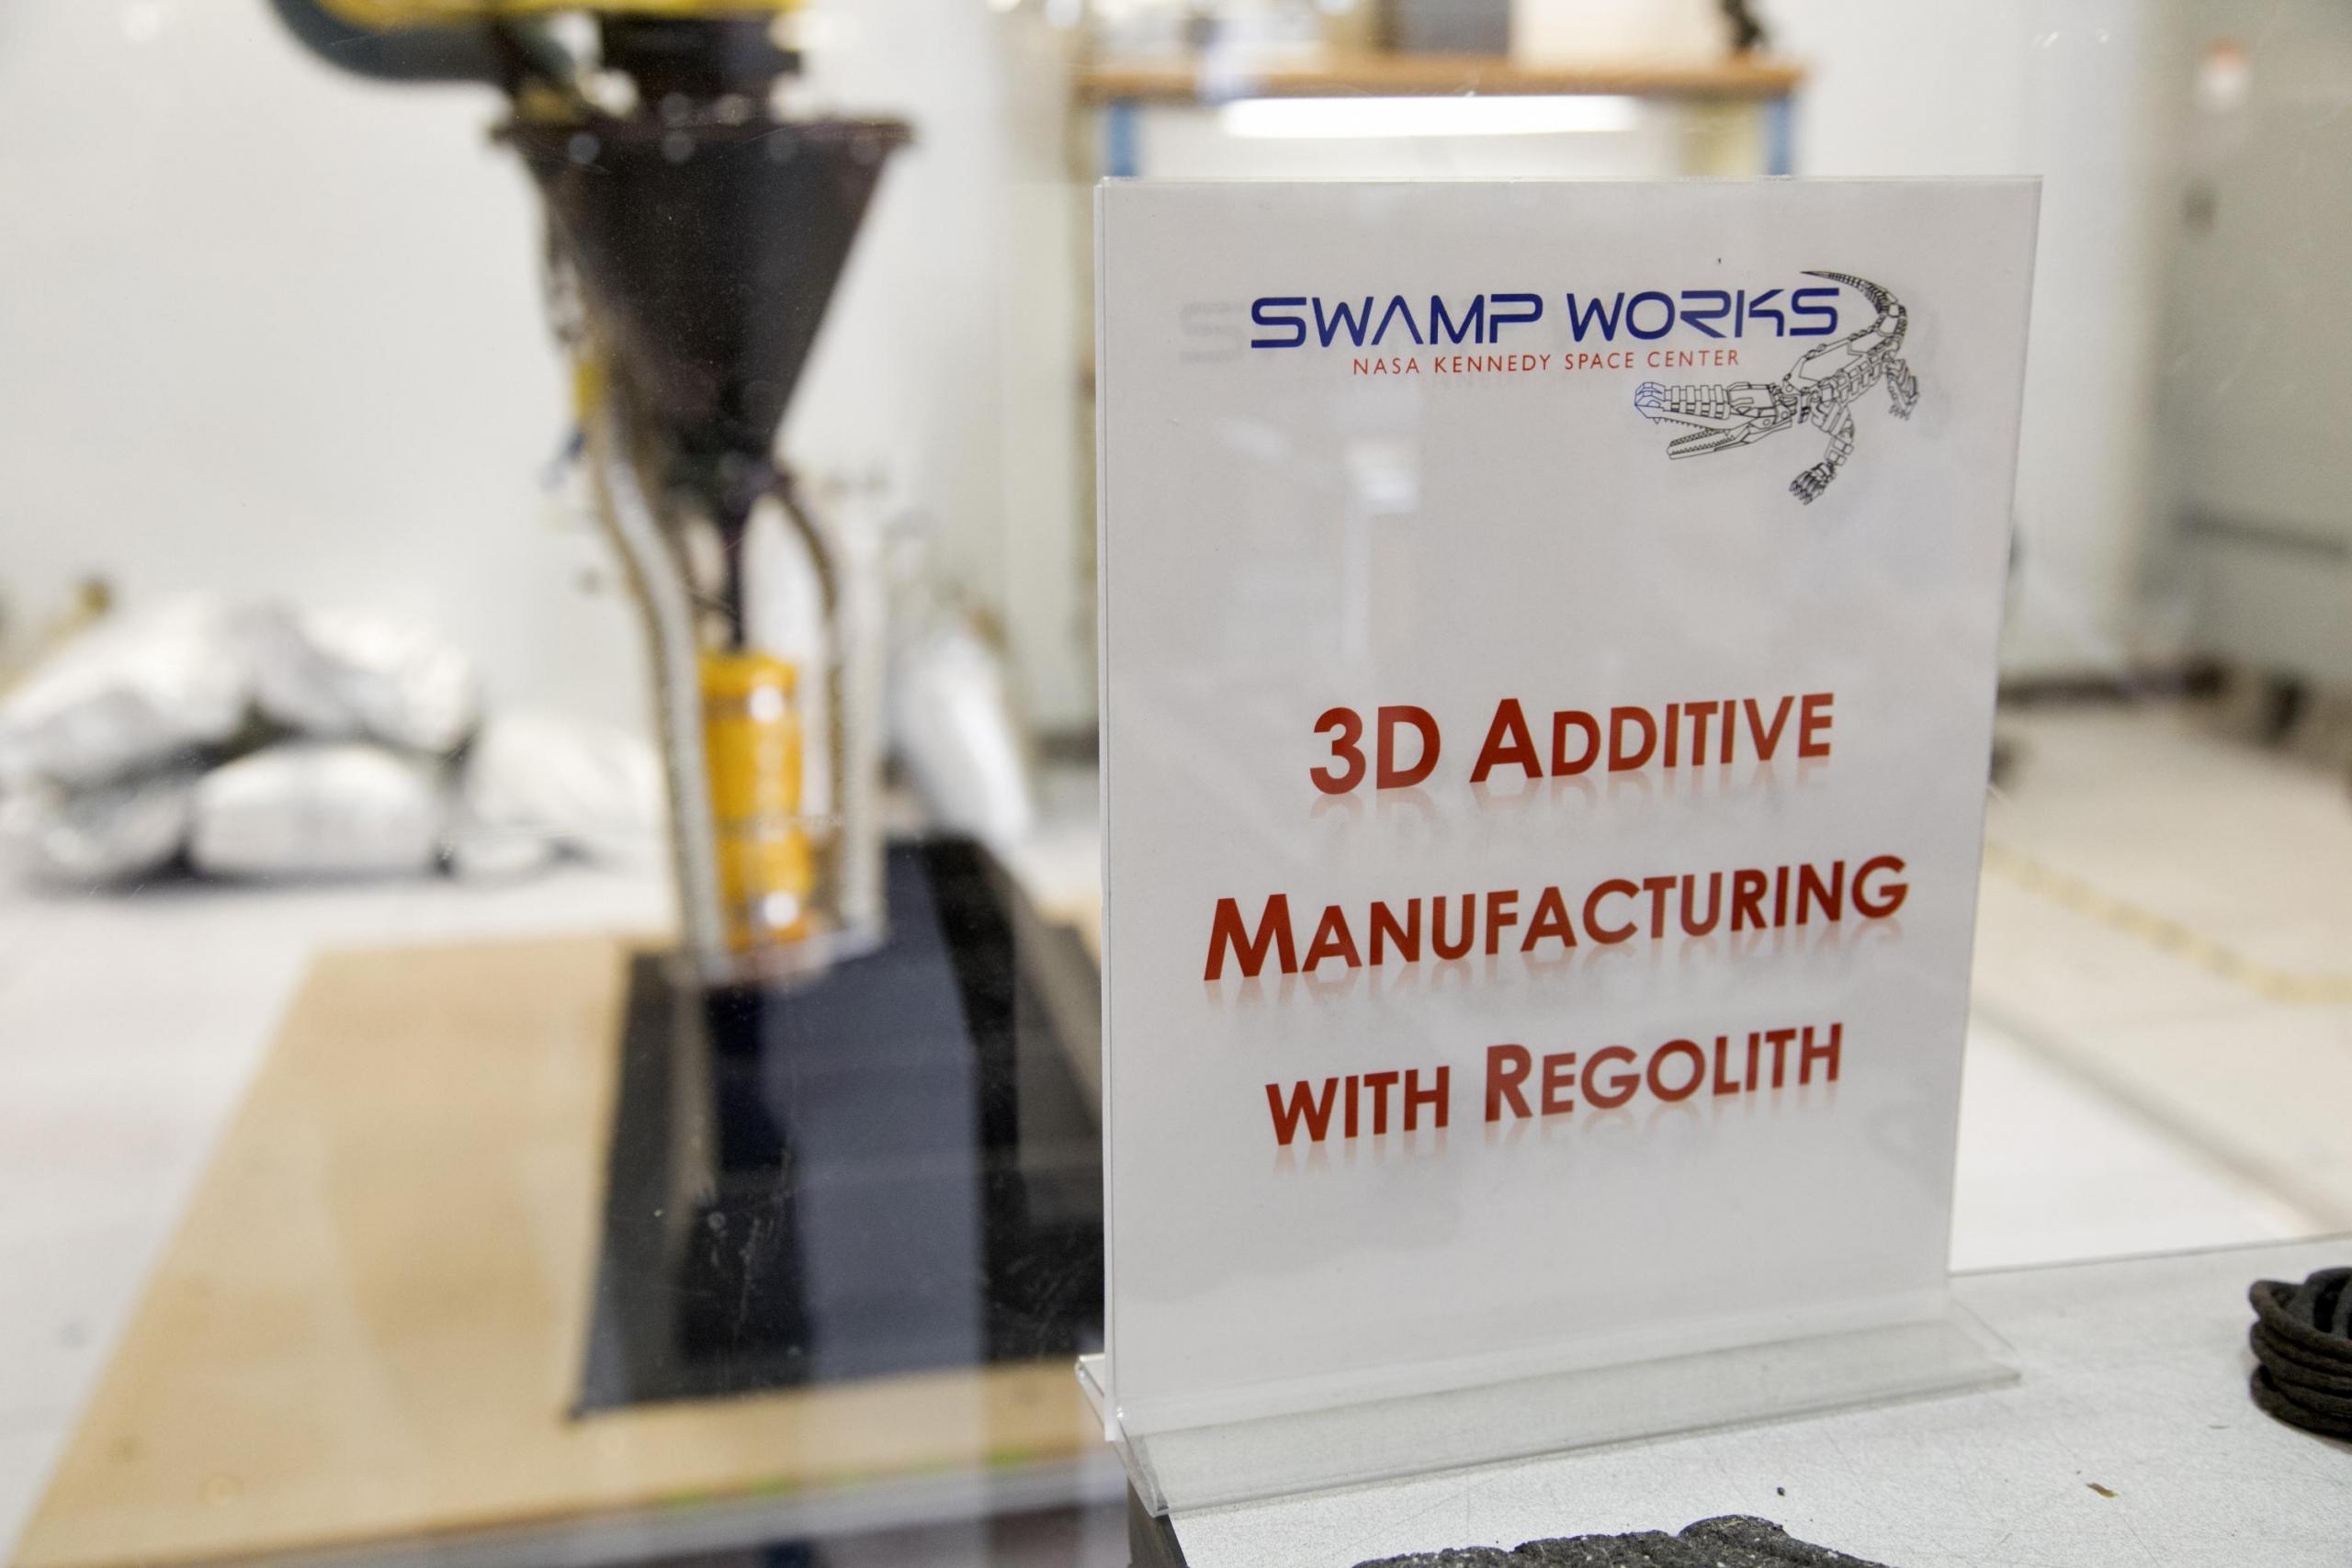 The 3-D printer used to make things out of lunar dust (regolith) at the Kennedy Space Center.  Additive manufacturing is another name for 3-D printing.